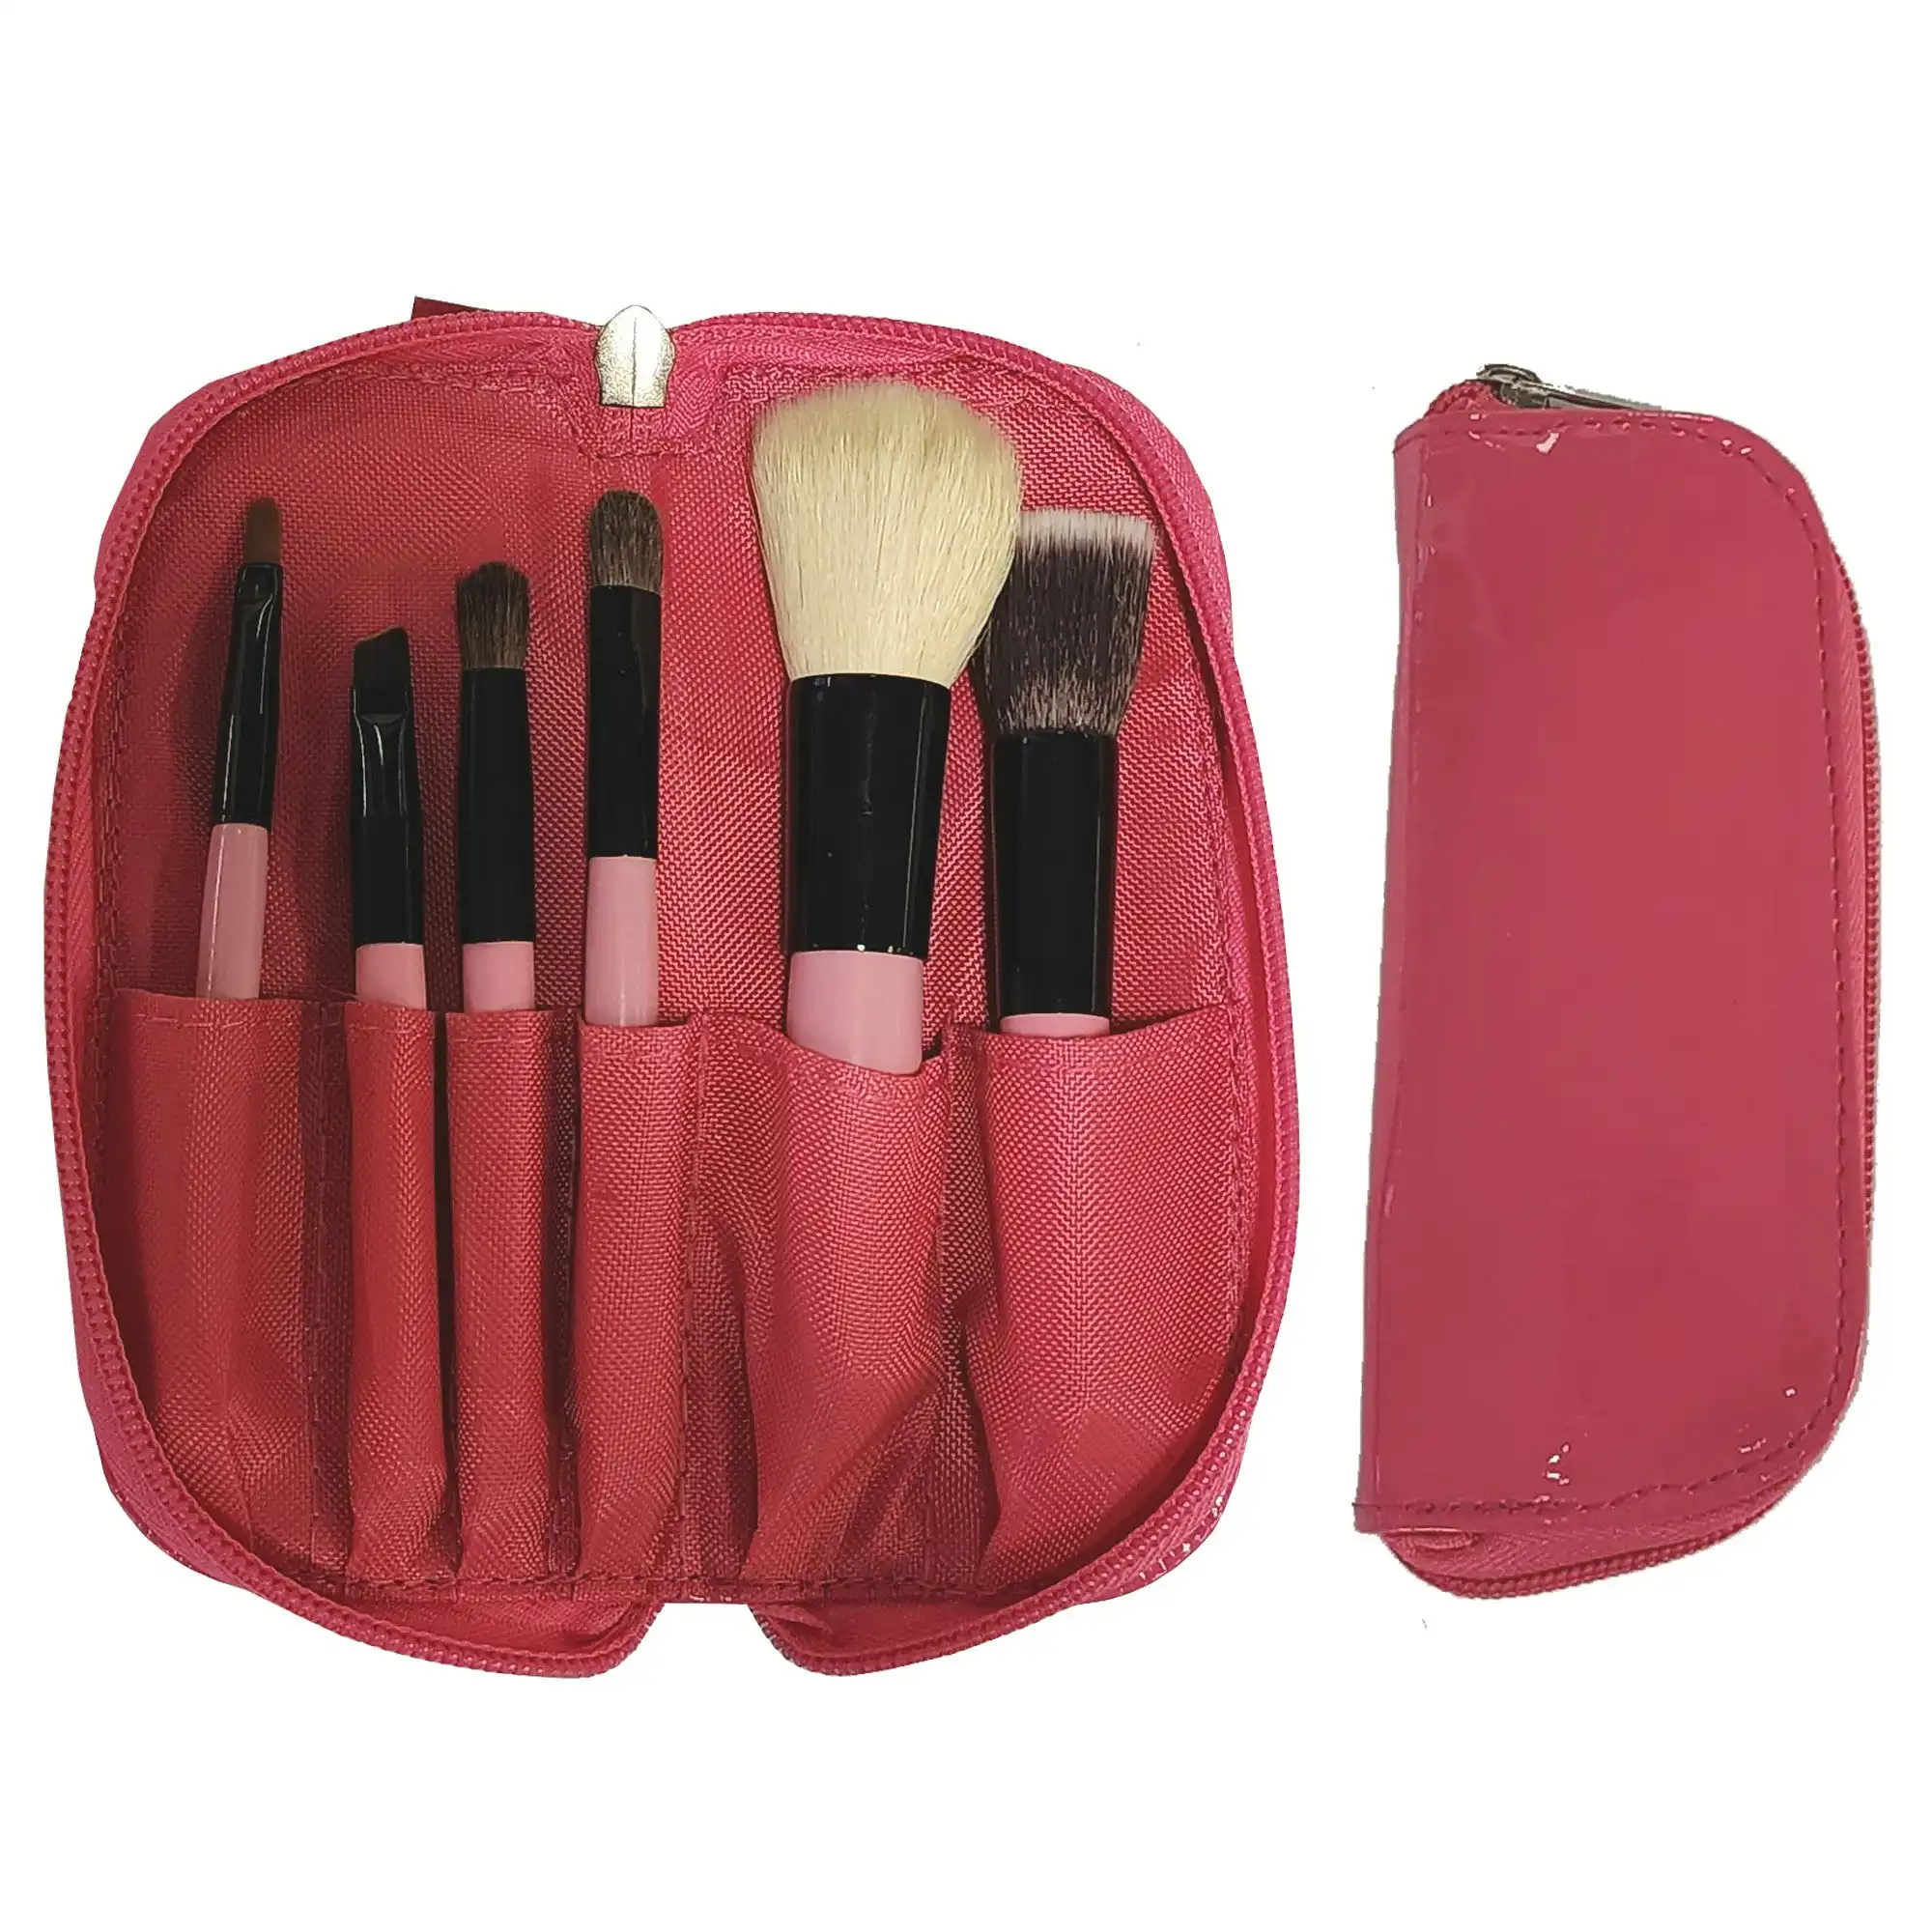 6 Piece Travel Makeup Brush Set Soft Bristle with Zip Up Carry Case Pink